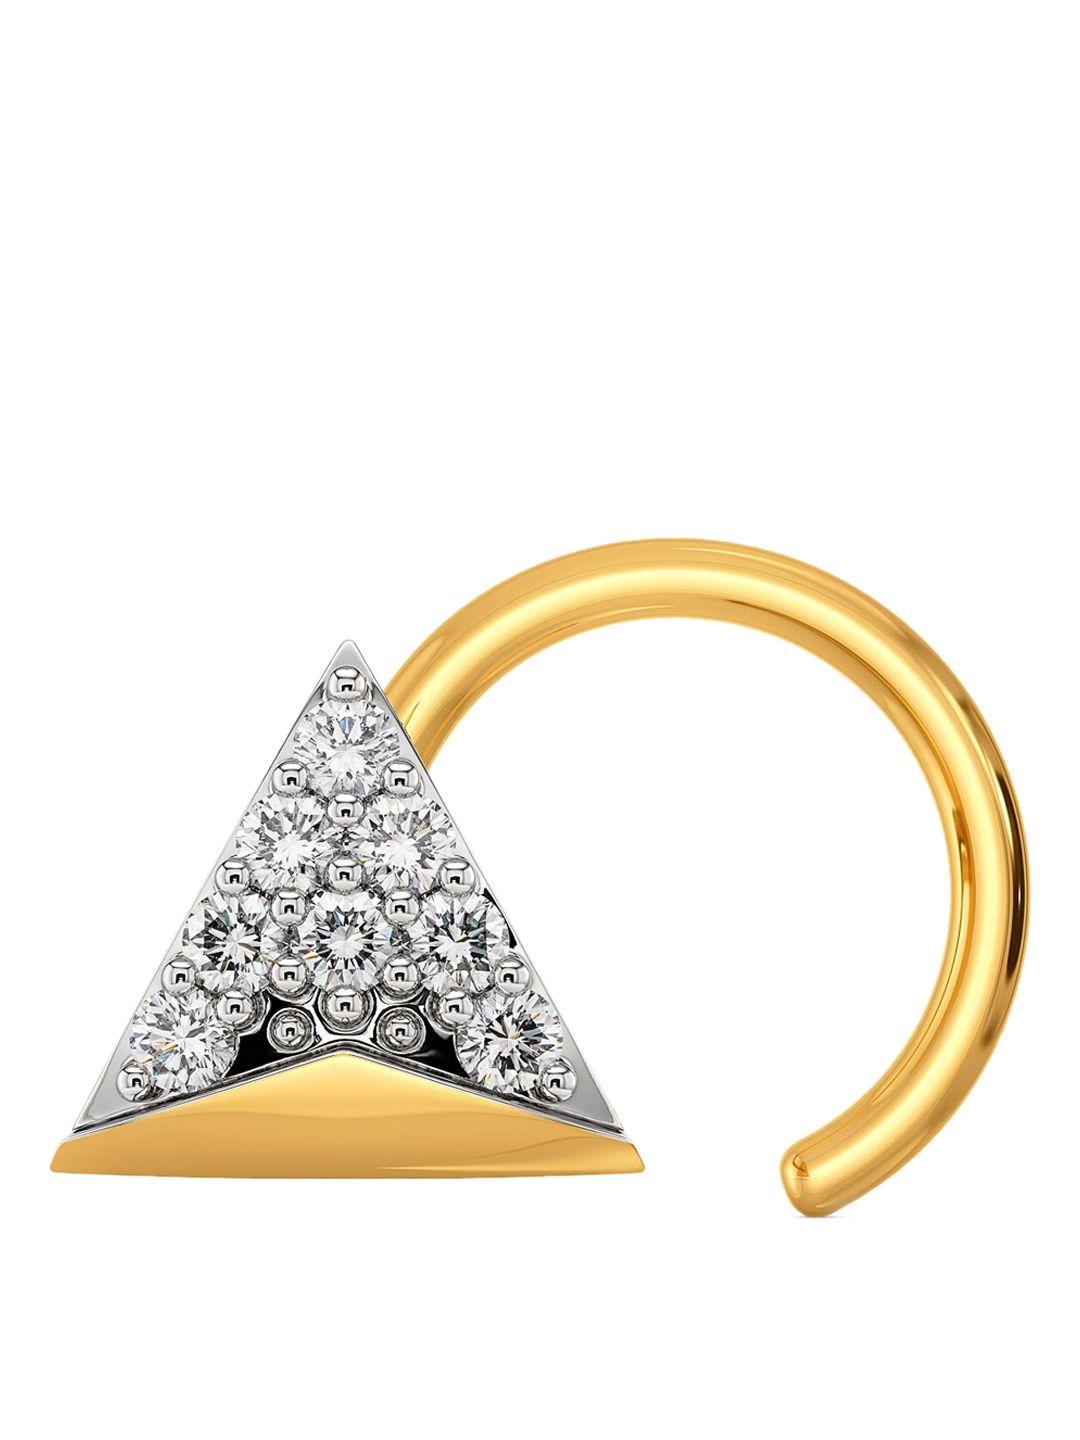 melorra suit n social 18kt gold rhodium-plated triangular shaped diamond studded nosepin